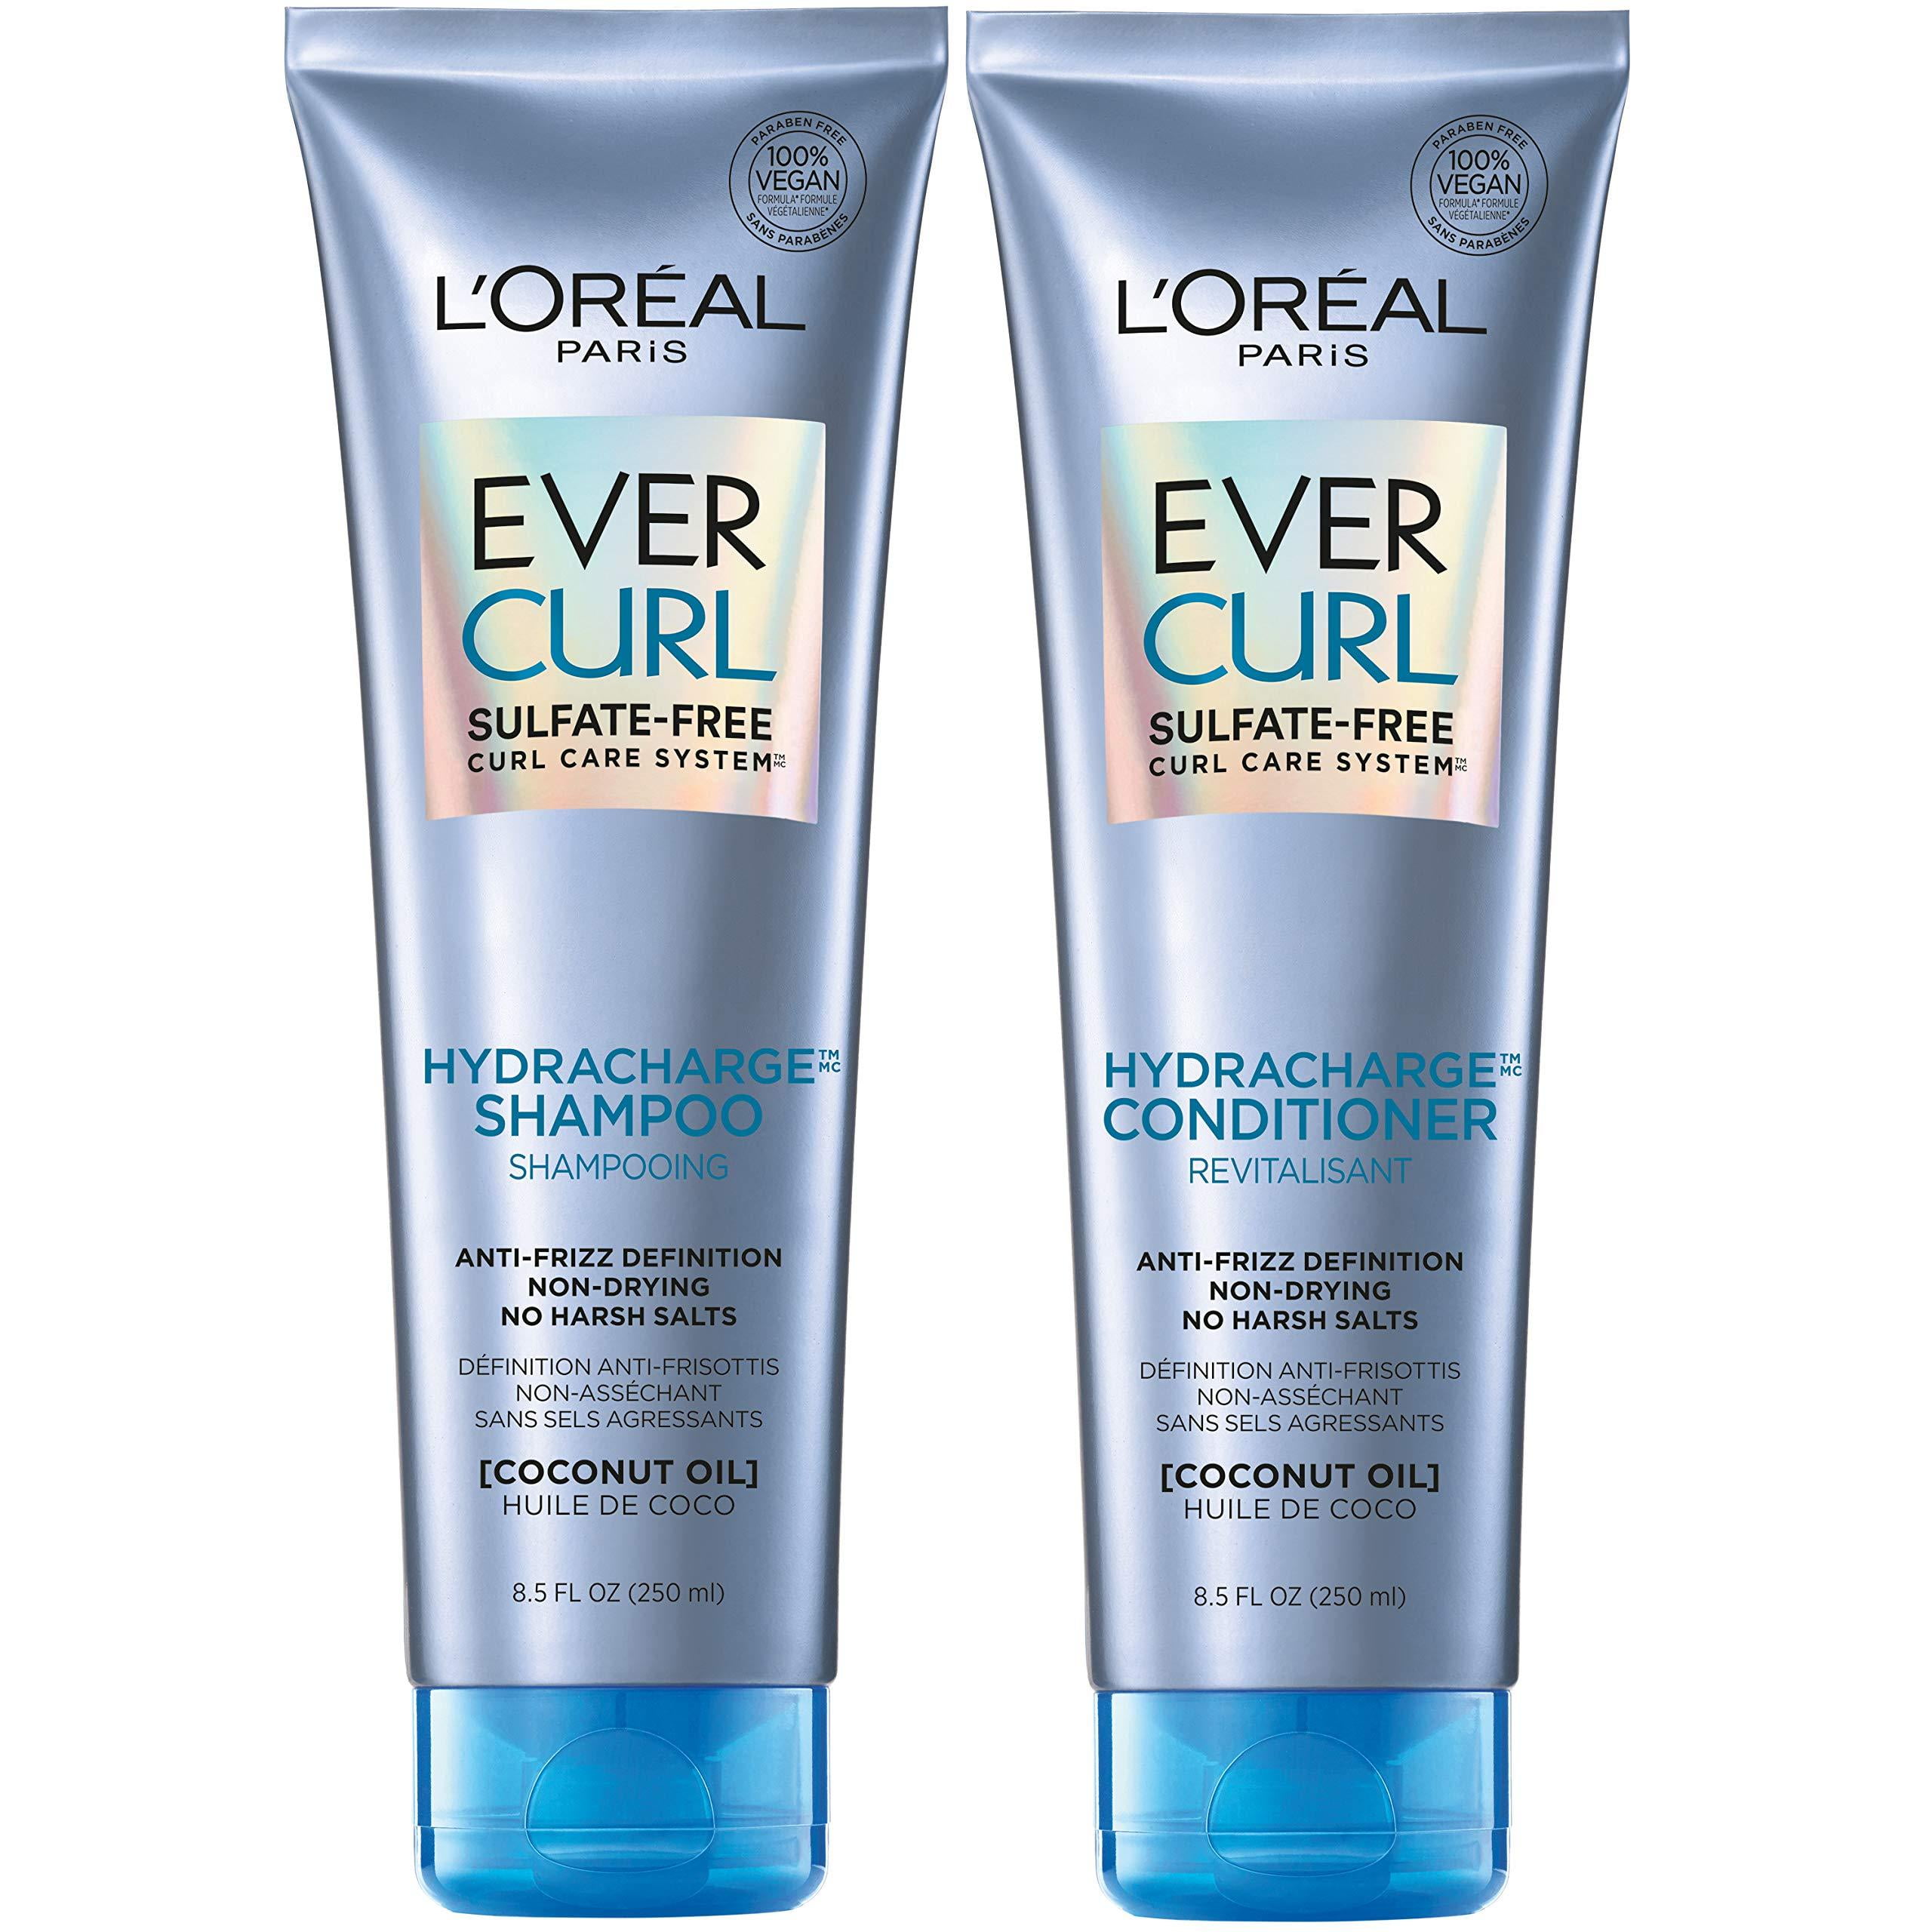 L'Oreal Paris EverCurl Sulfate Free Shampoo and Conditioner Kit for Curly  Hair, Lightweight, Anti-Frizz Hydration, Gentle on Curls, with Coconut Oil,   Ounce, Set of 2 (Packaging May Var 